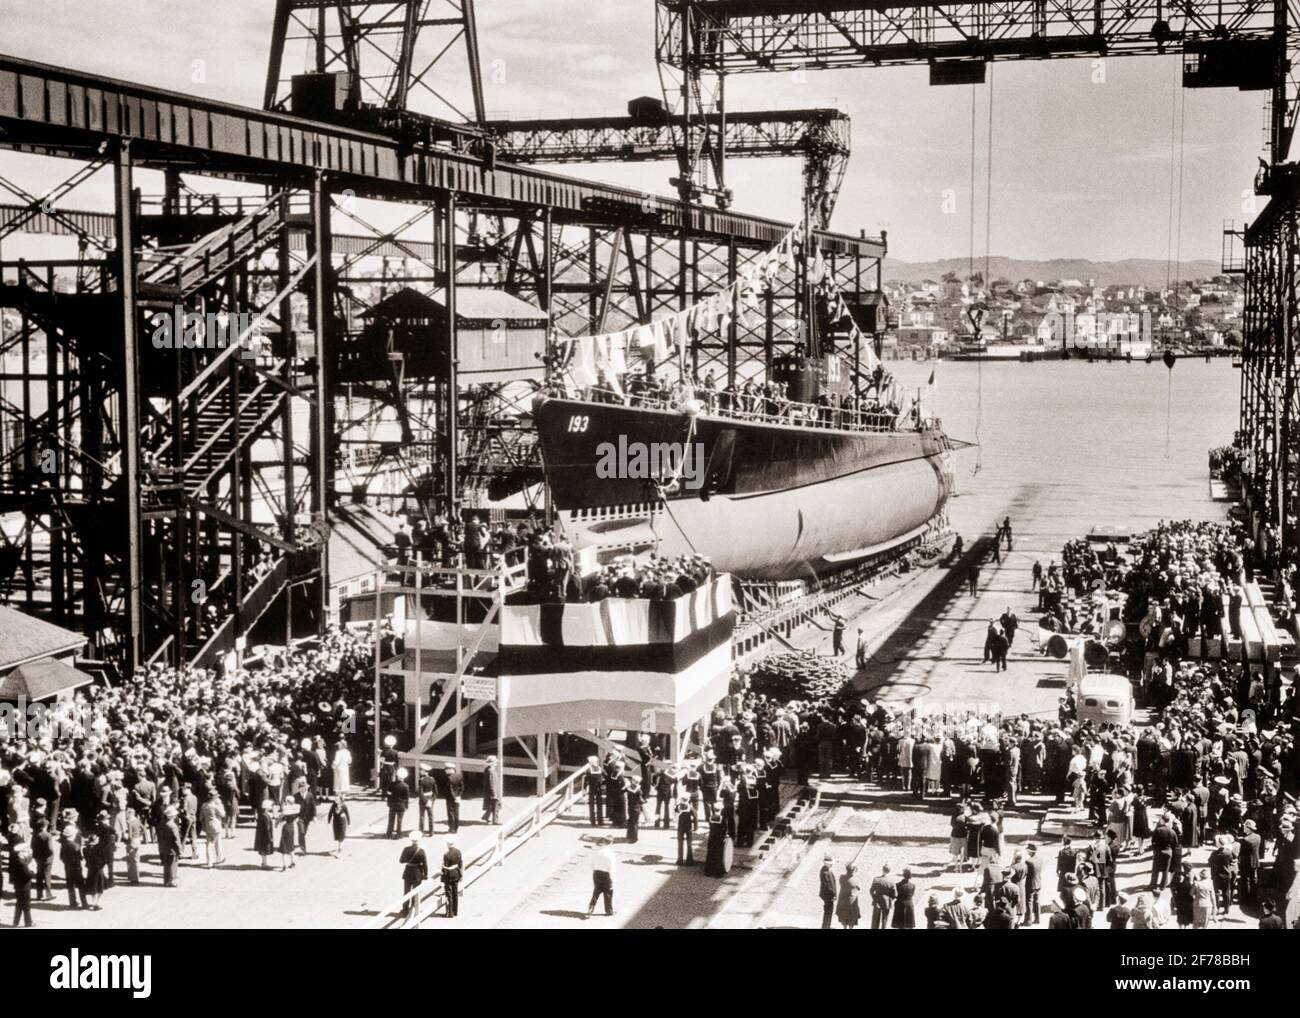 1930s APRIL 1 1939 SUBMARINE USS SWORDFISH LAUNCHING AT MARE ISLAND NAVY YARD VALLEJO CA USA IN 1945 SUNK ALL HANDS LOST AT SEA - n199 HAR001 HARS SUBMARINES SUBS TOGETHERNESS BLACK AND WHITE HAR001 LAUNCHING NAVY YARD OLD FASHIONED SUNK Stock Photo